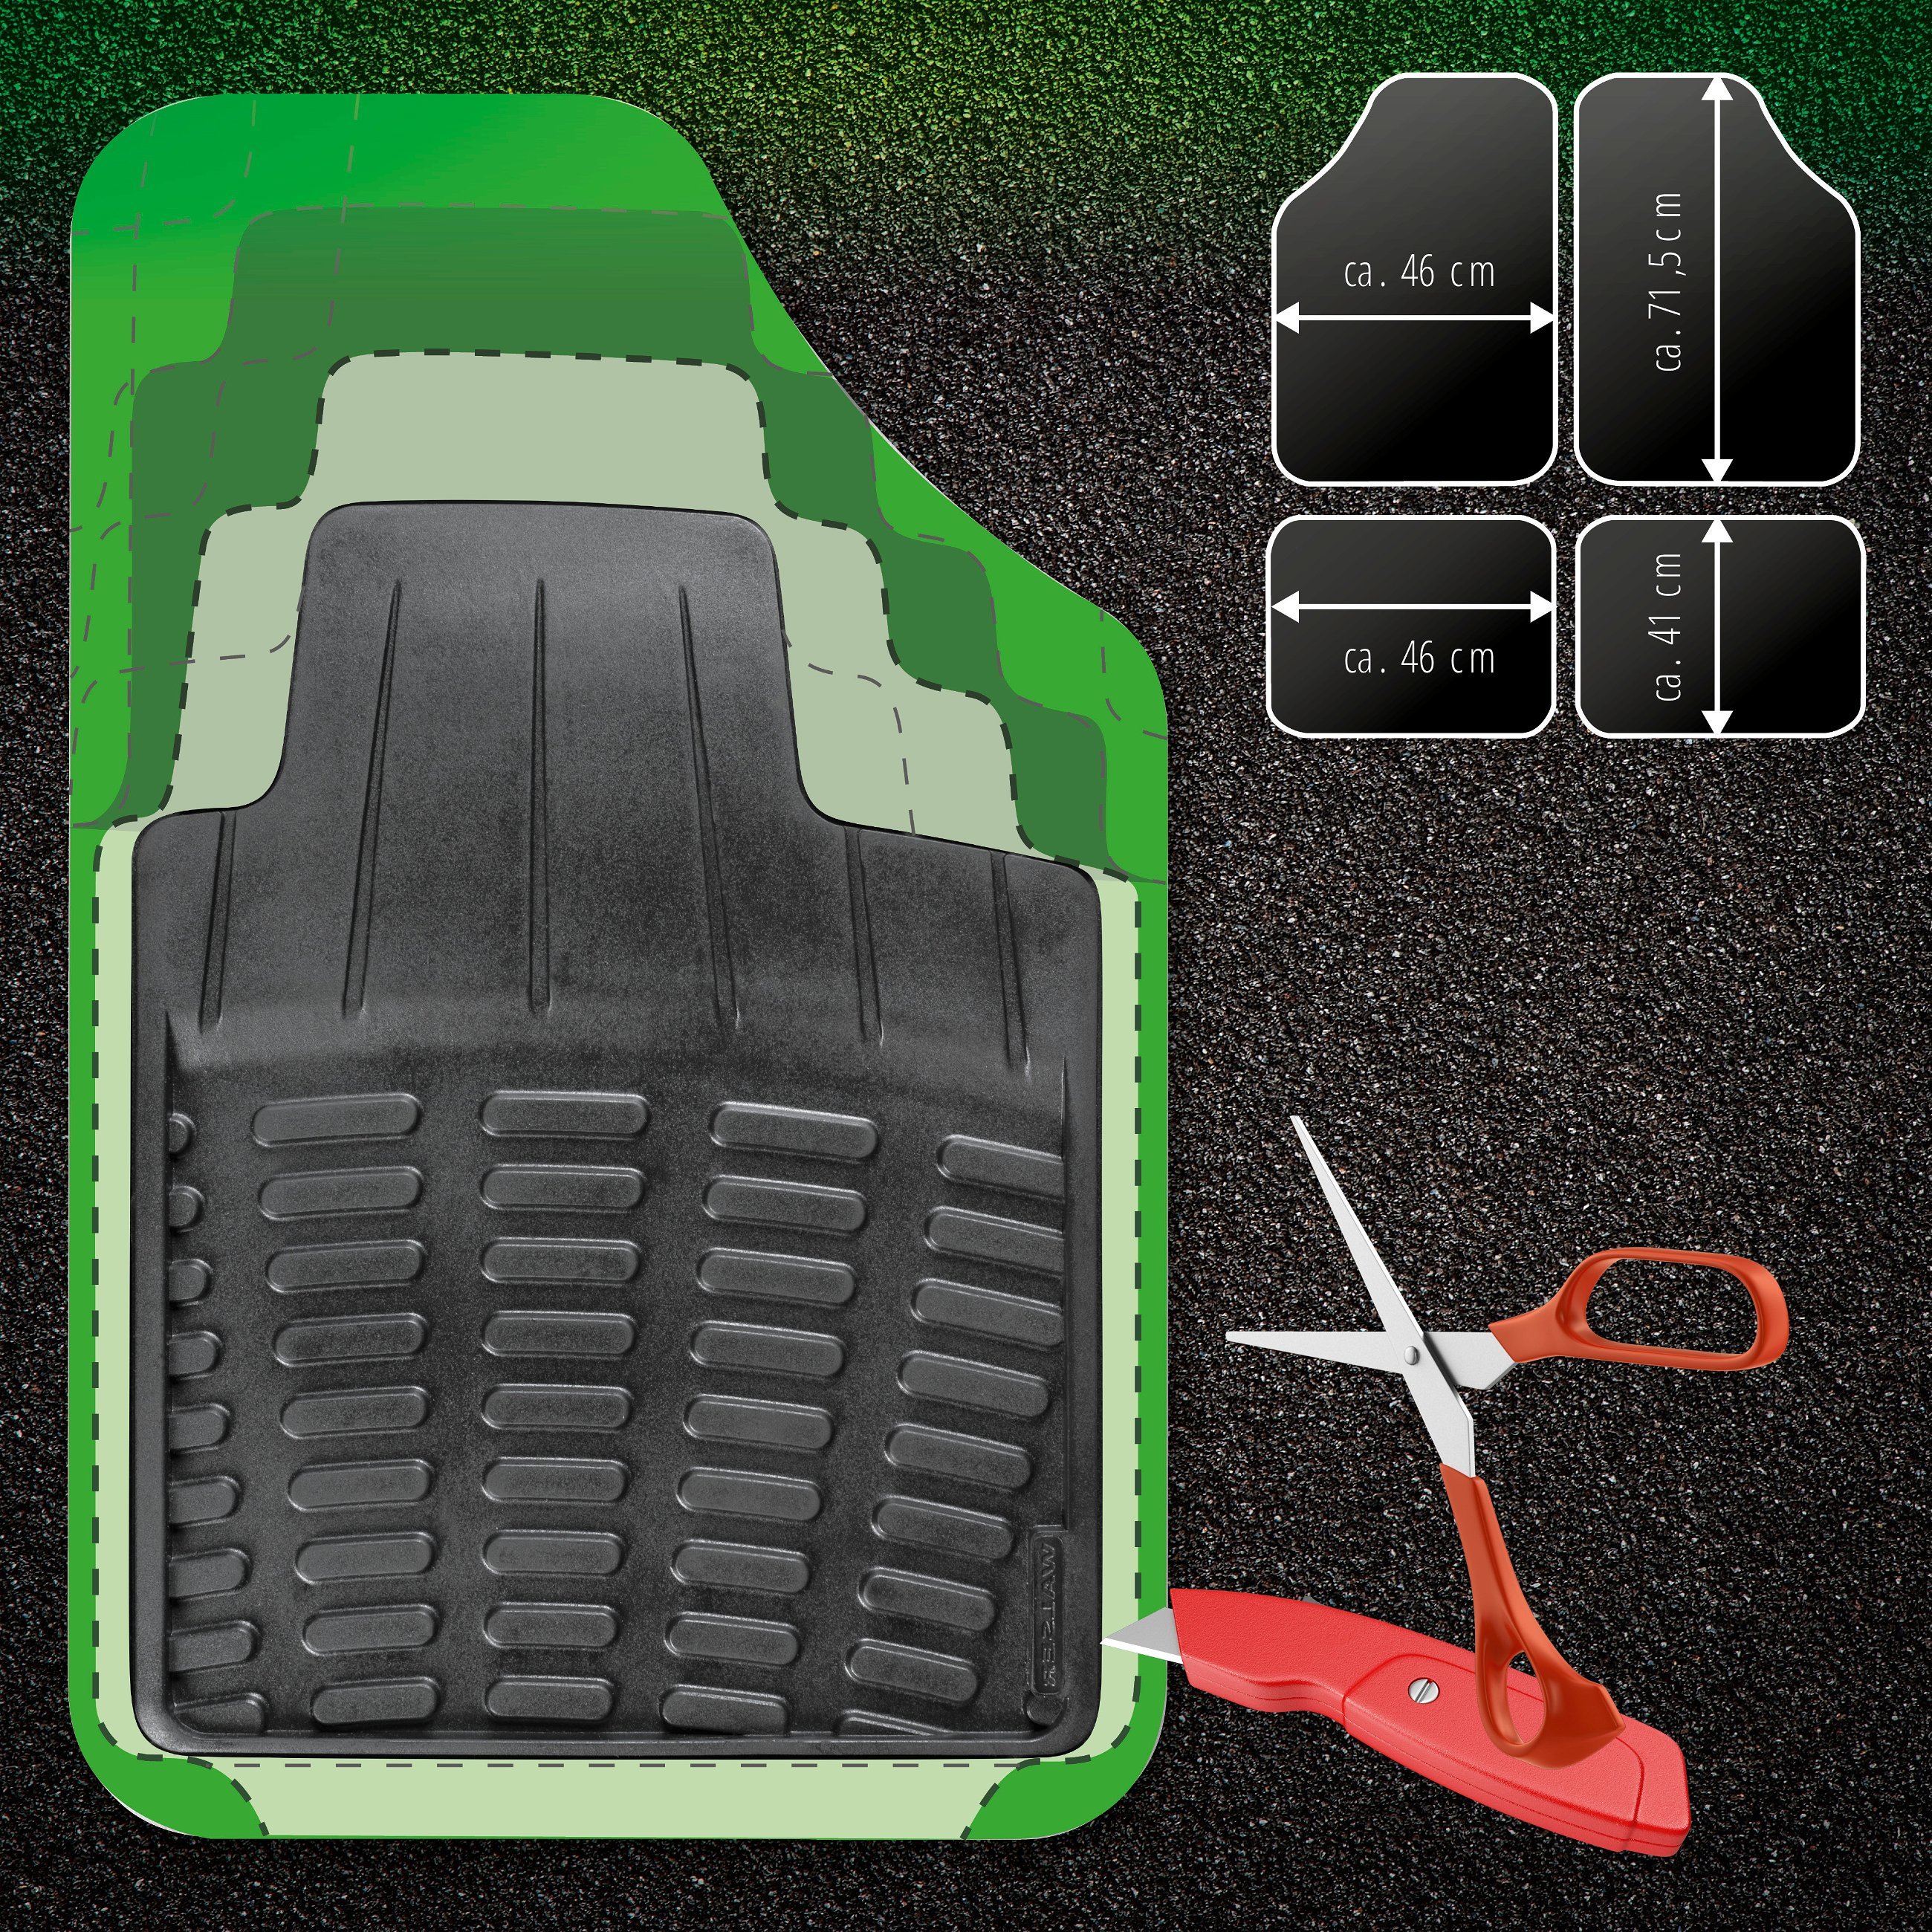 Rubber mats for Maximus Plus, can be cut to size